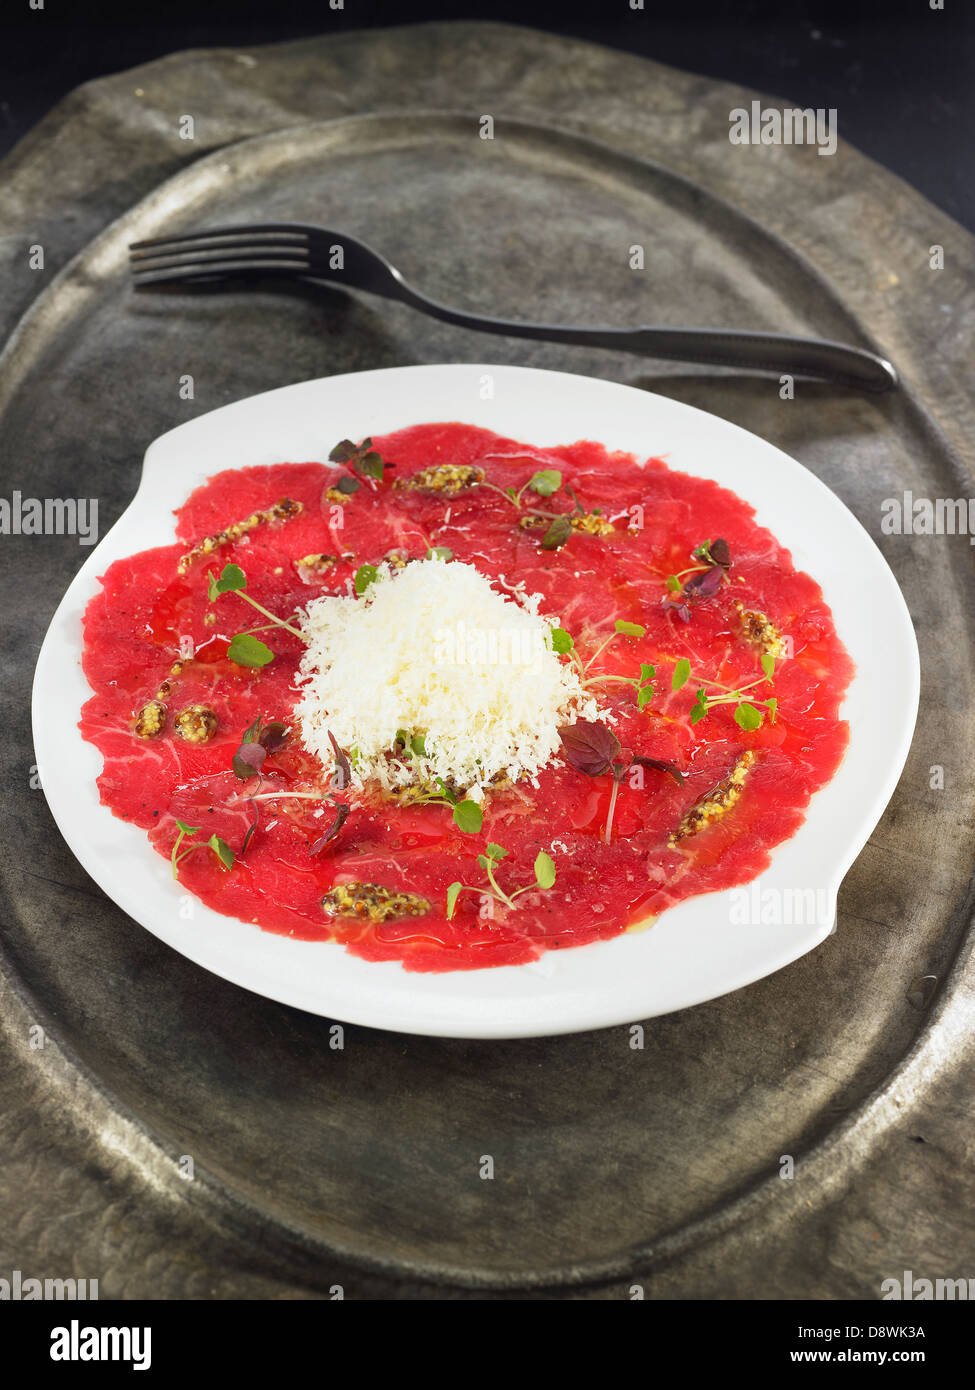 Veal carpaccio with pesto and grated parmesan Stock Photo